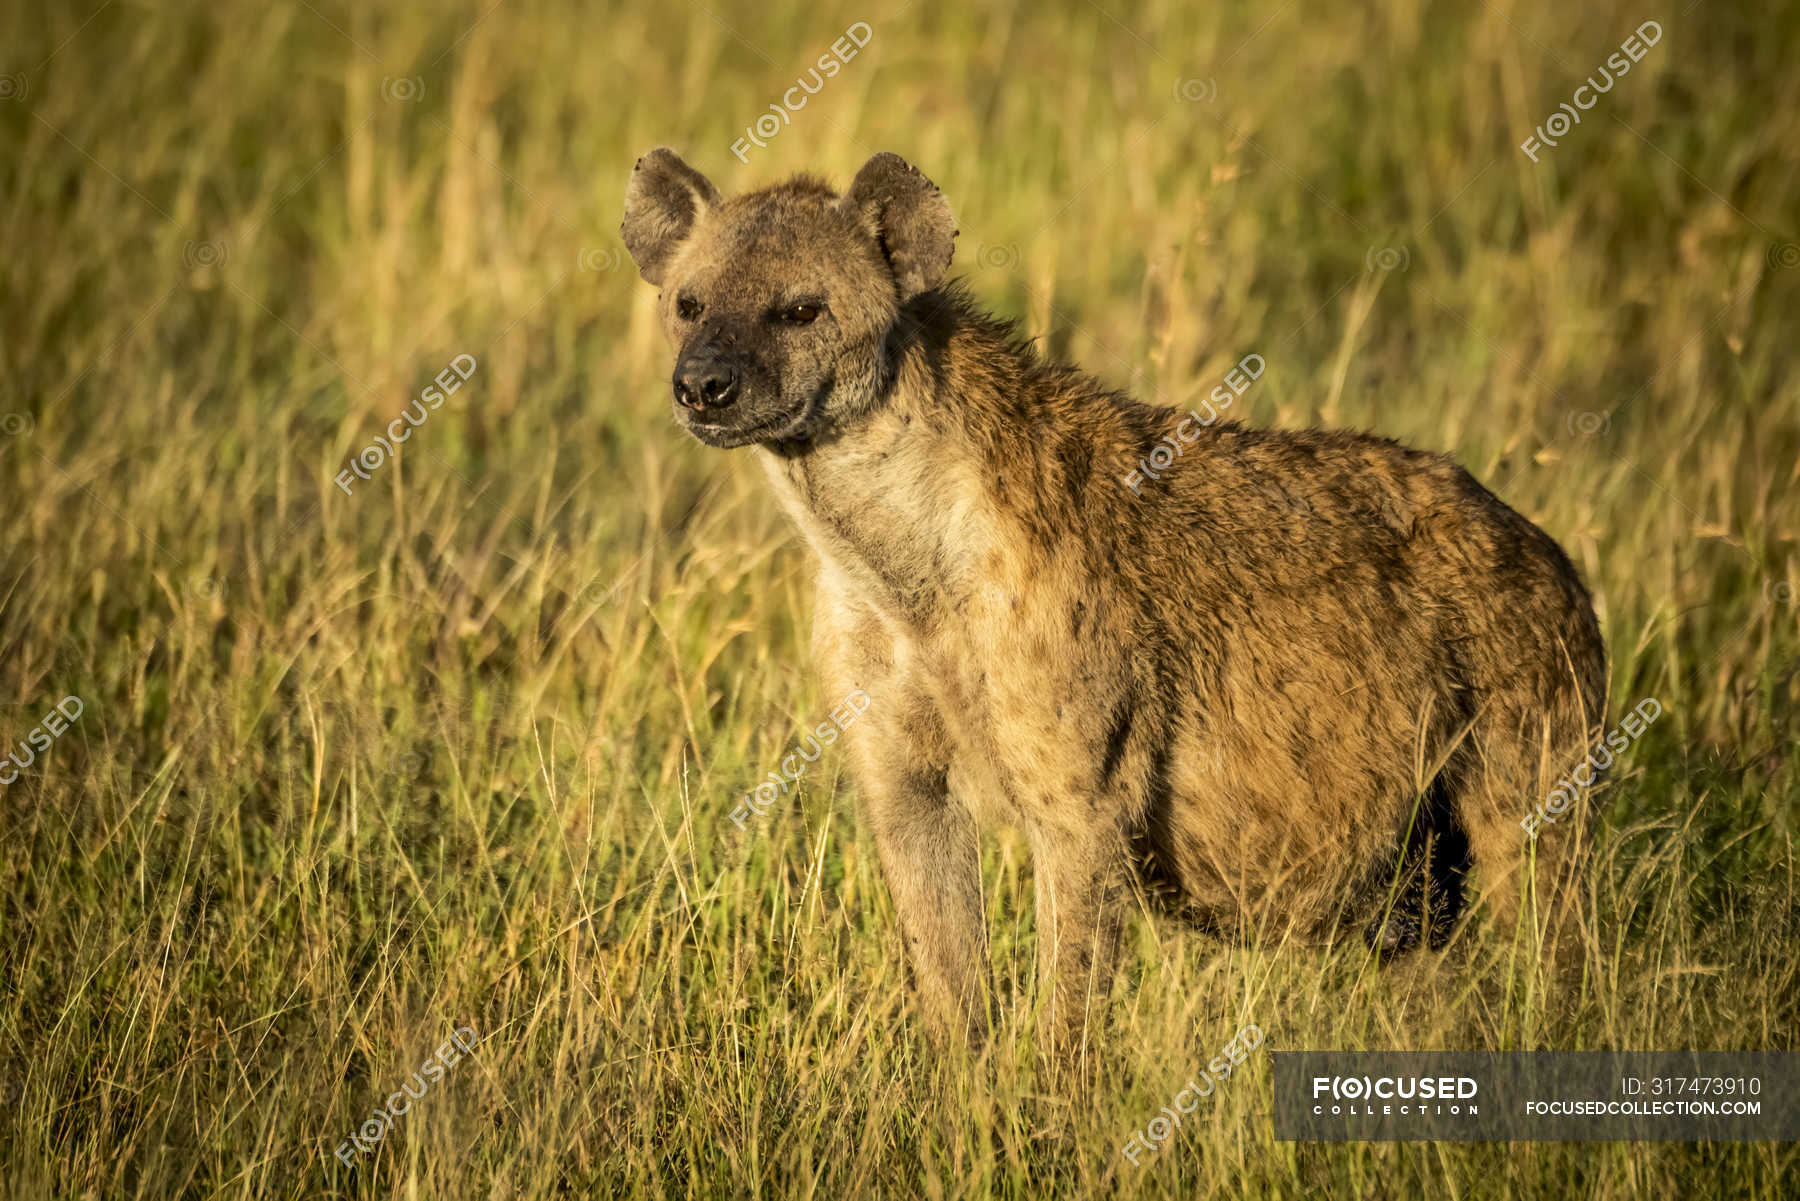 Spotted hyena at long grass in wild nature — outdoors, landscape - Stock  Photo | #317473910